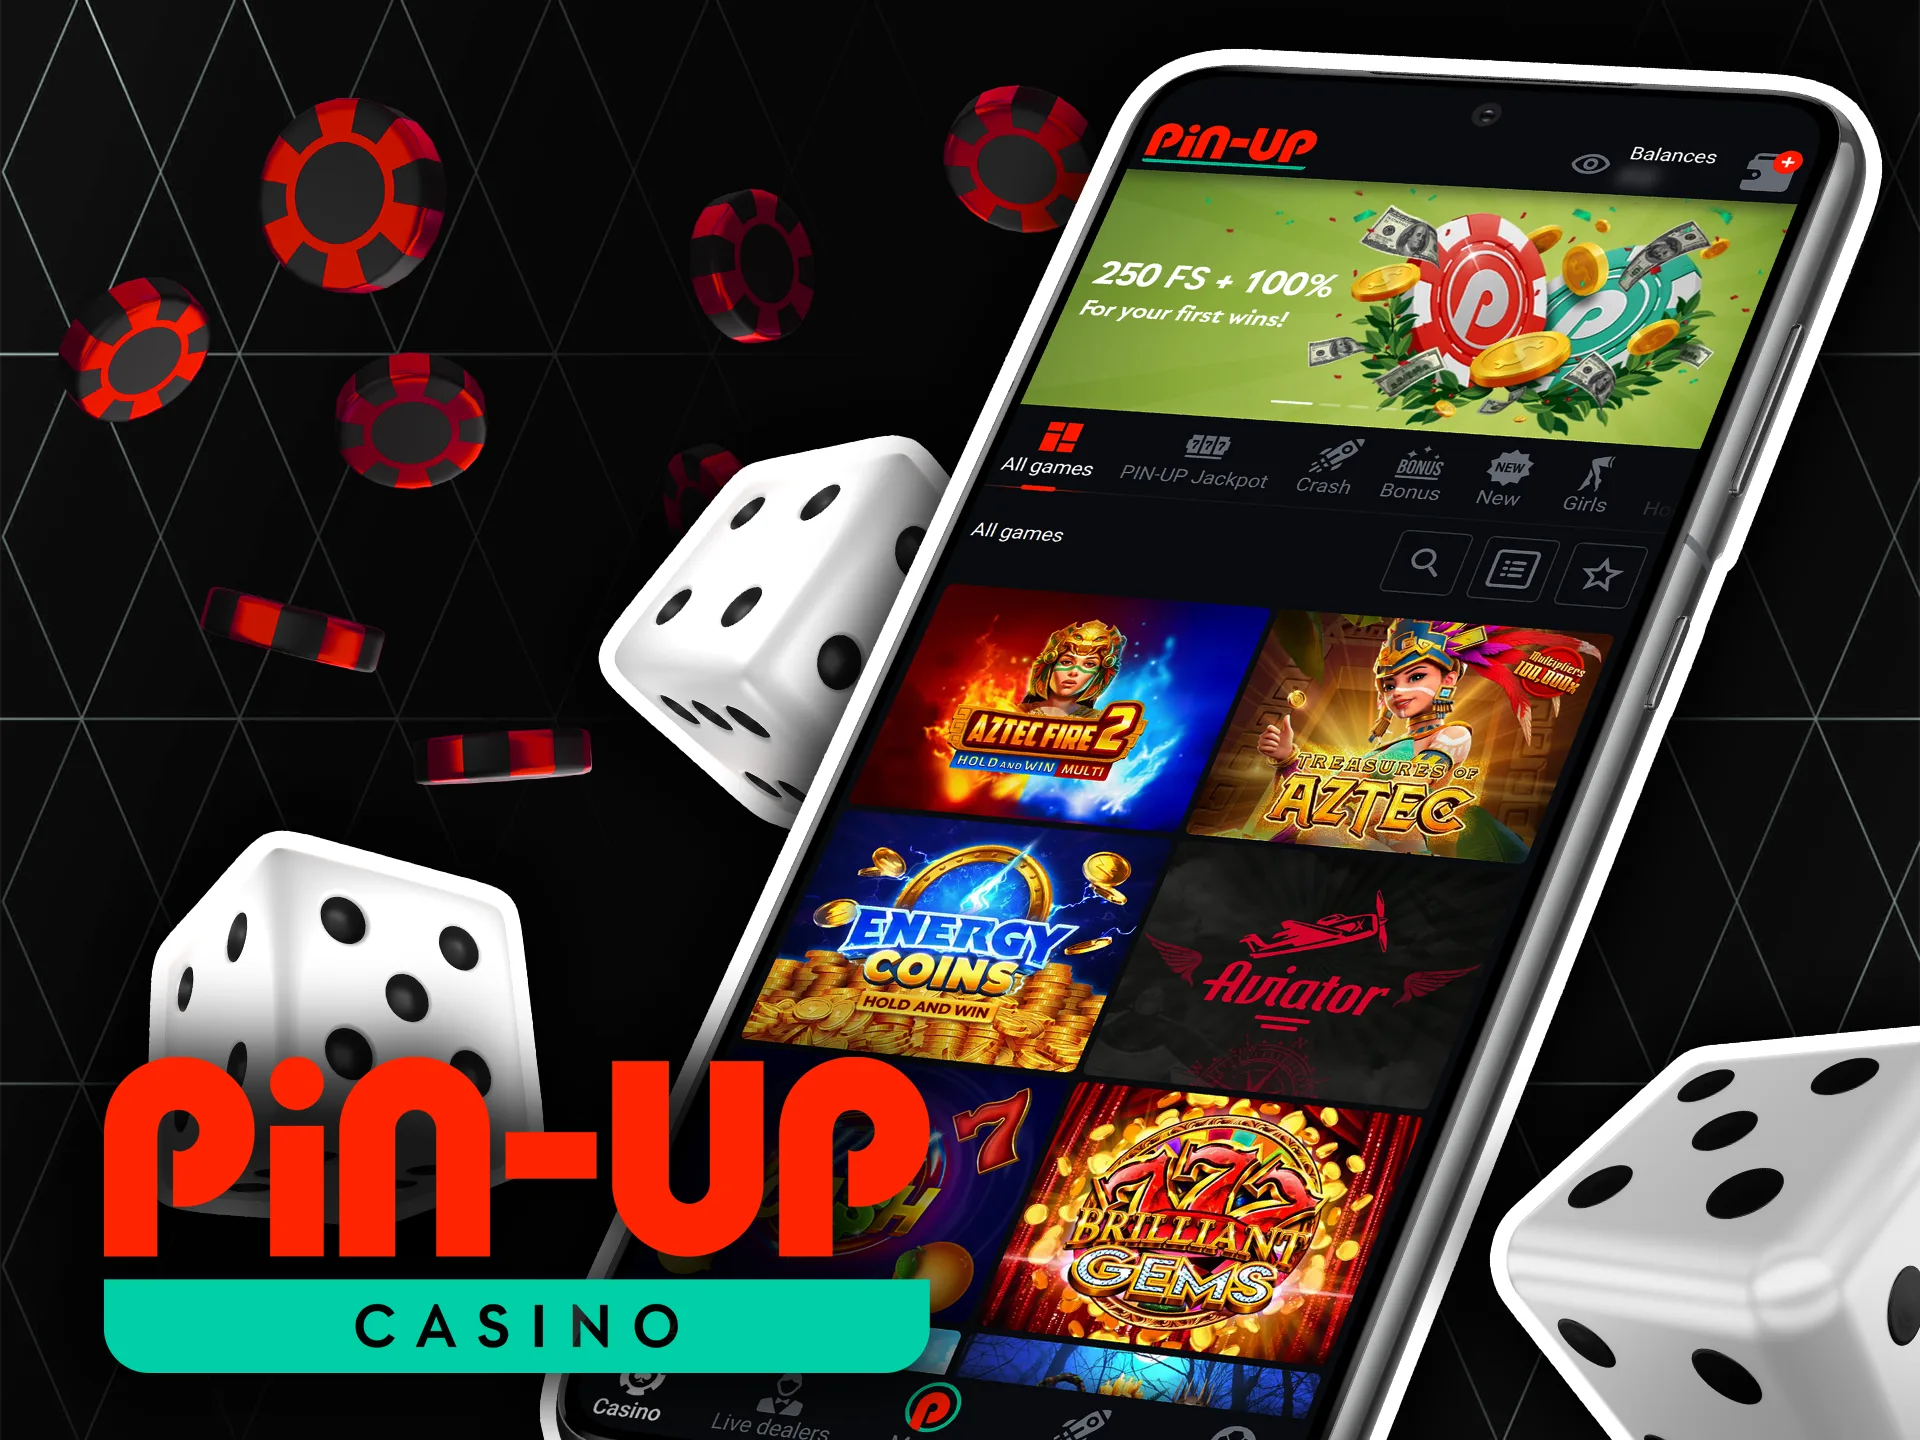 Download the Pin-Up app, sign up, get your bonus and start playing at the casino.